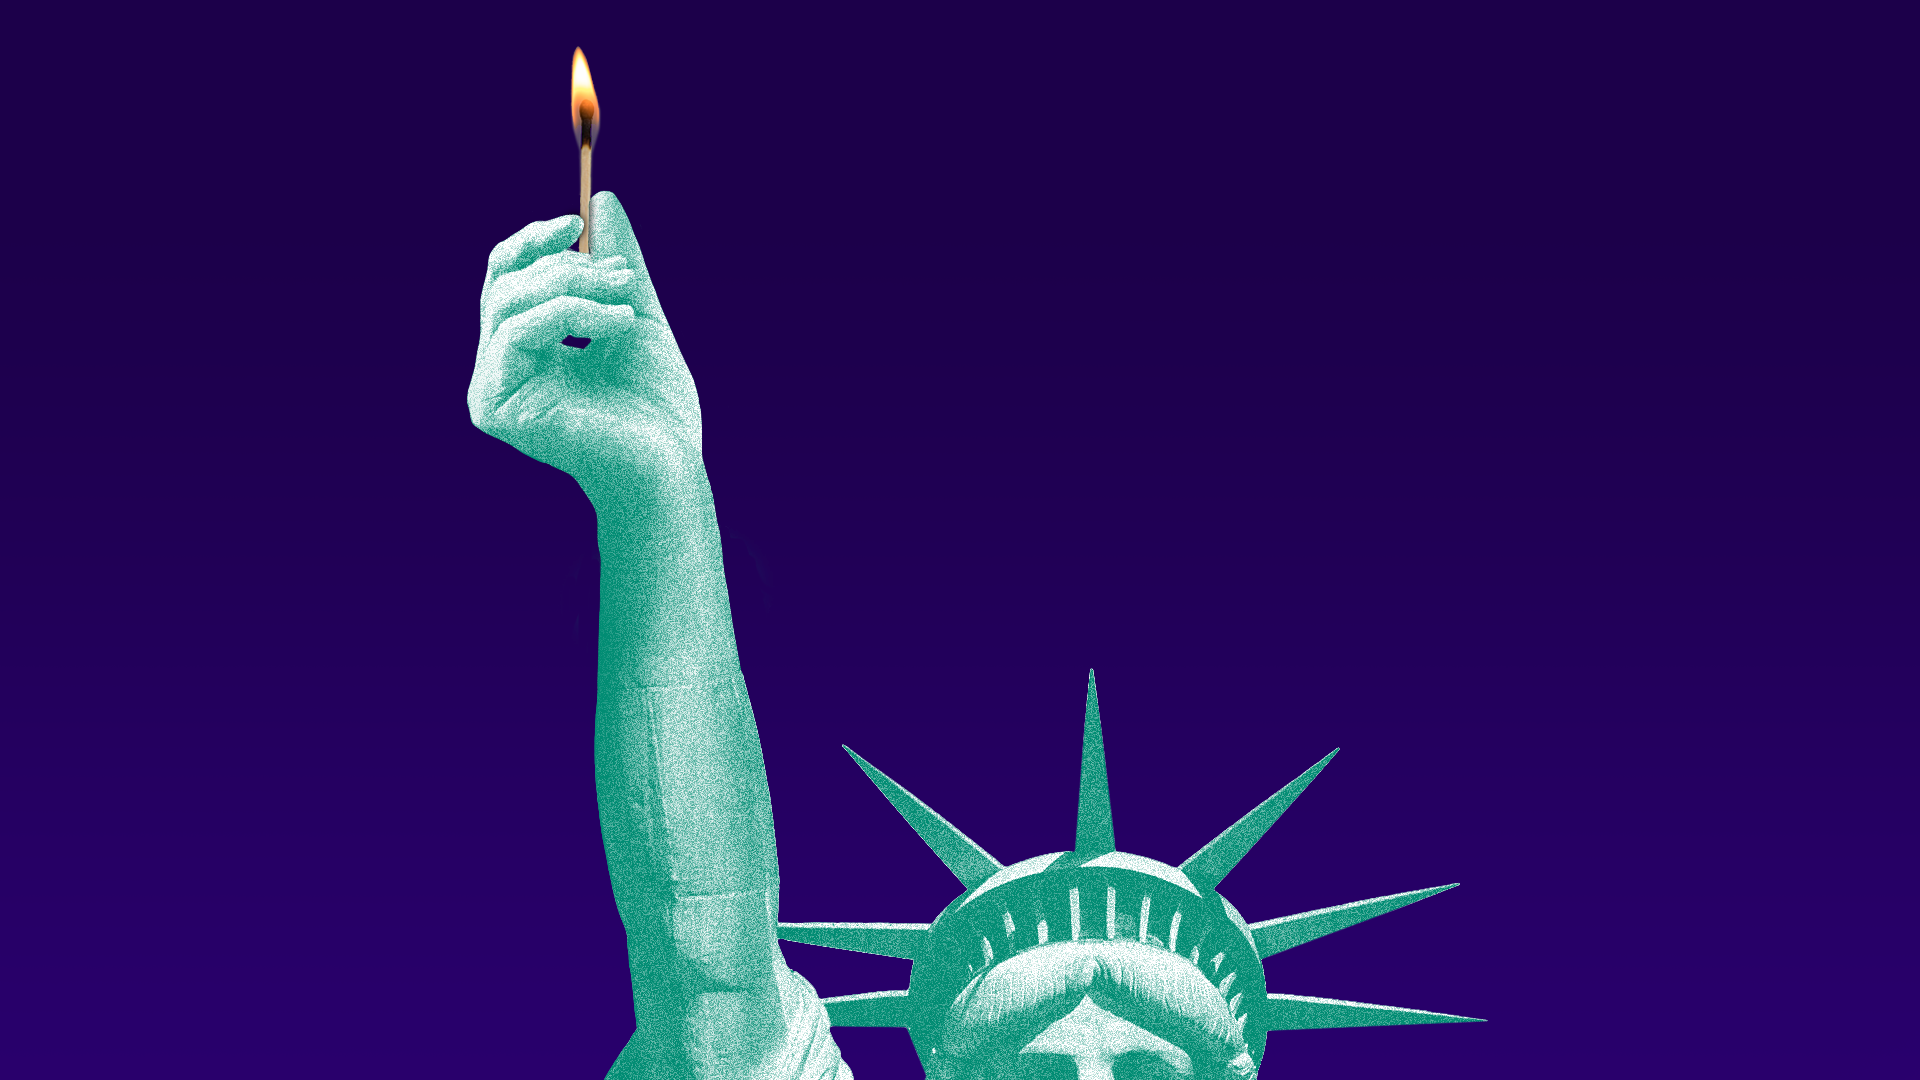 Statue of Liberty with torch replaced by matchstick